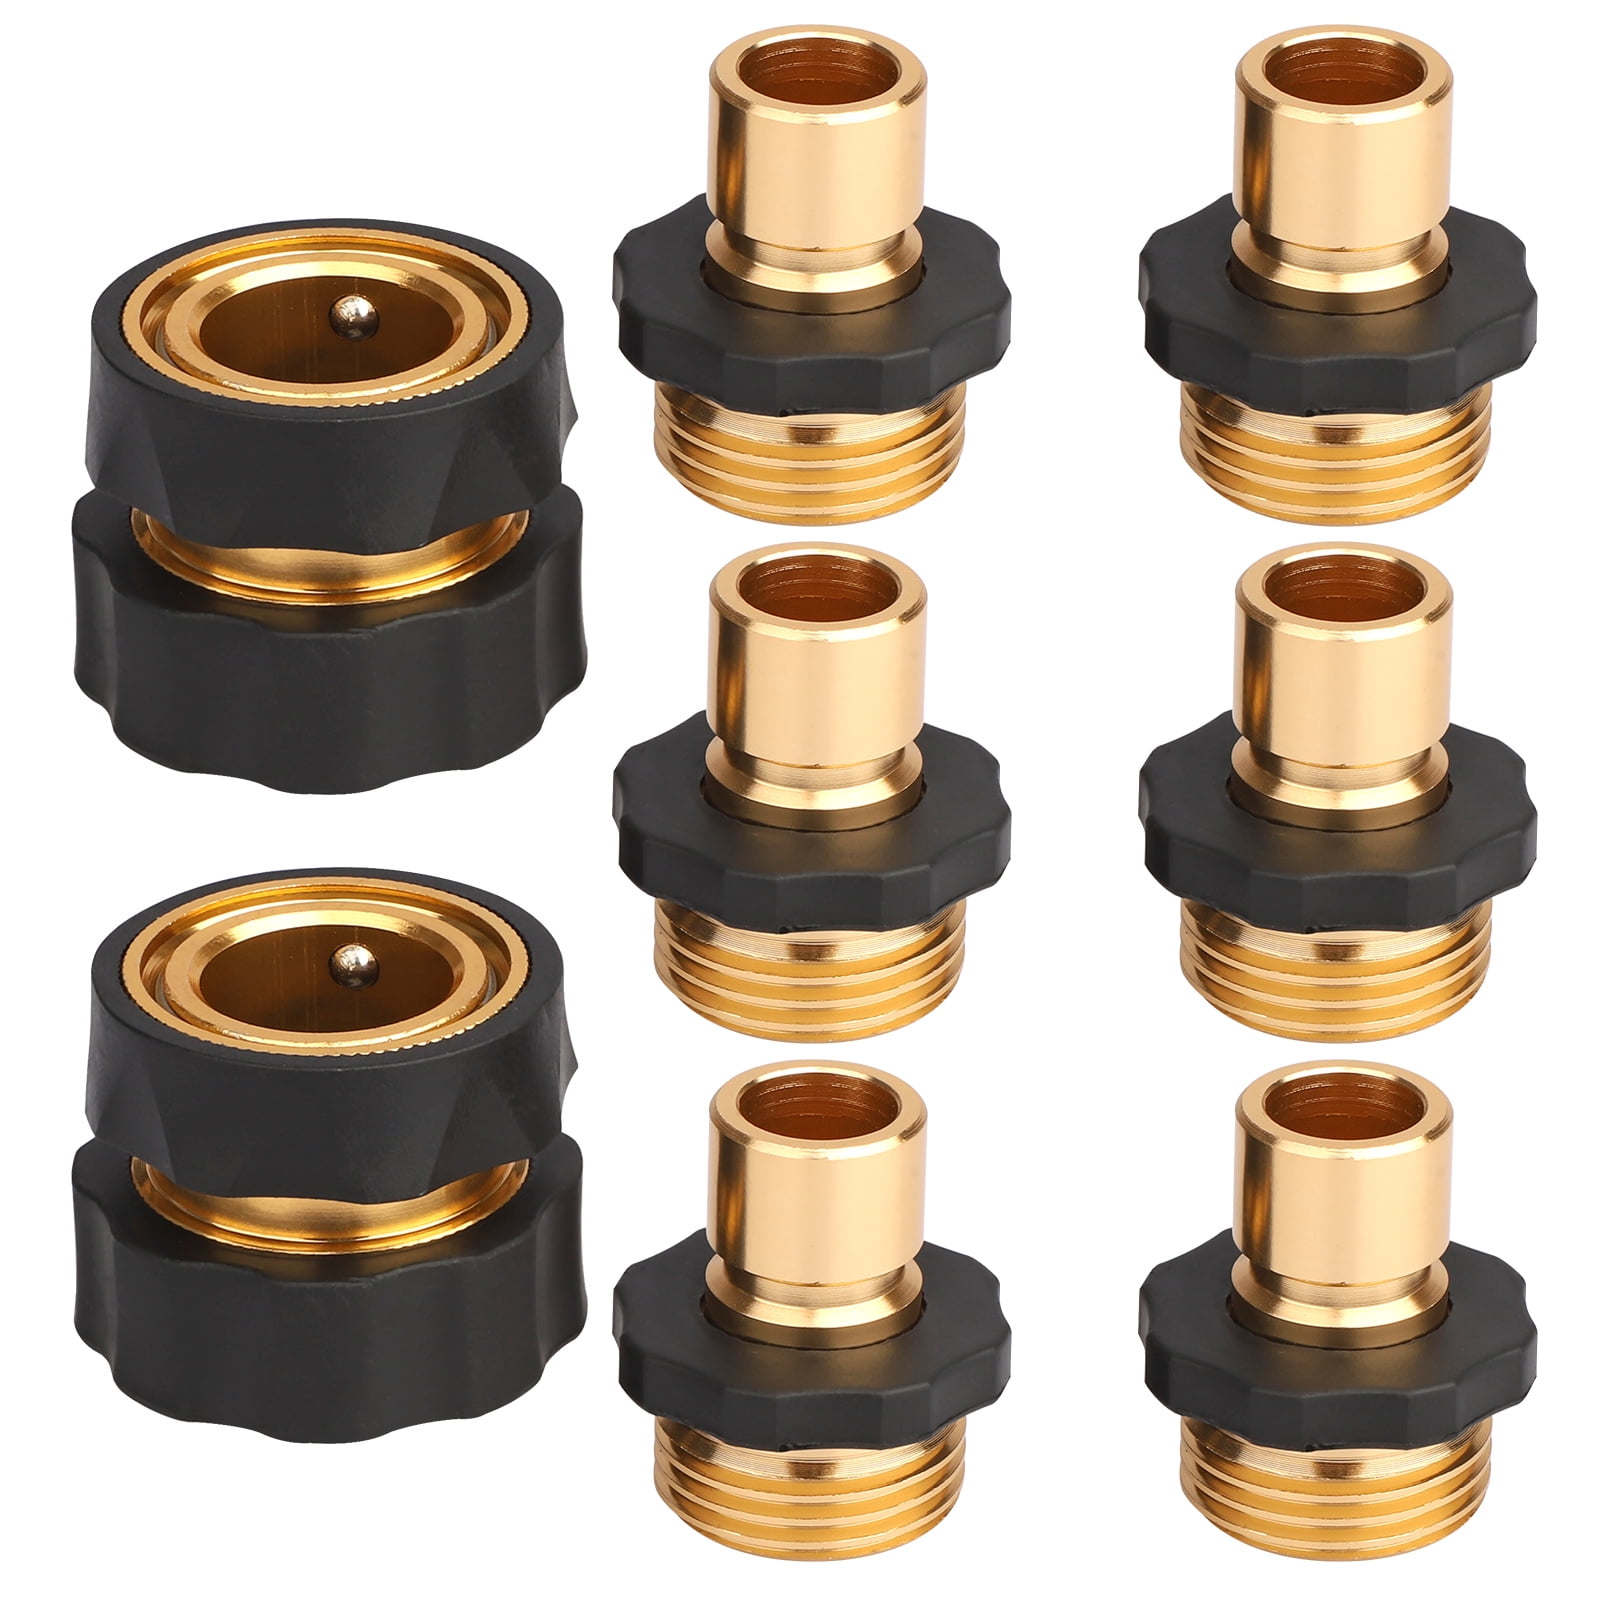 Details about   3/4' Garden Hose Quick Connect Water Hose Fit Brass Female Male Connector Set US 